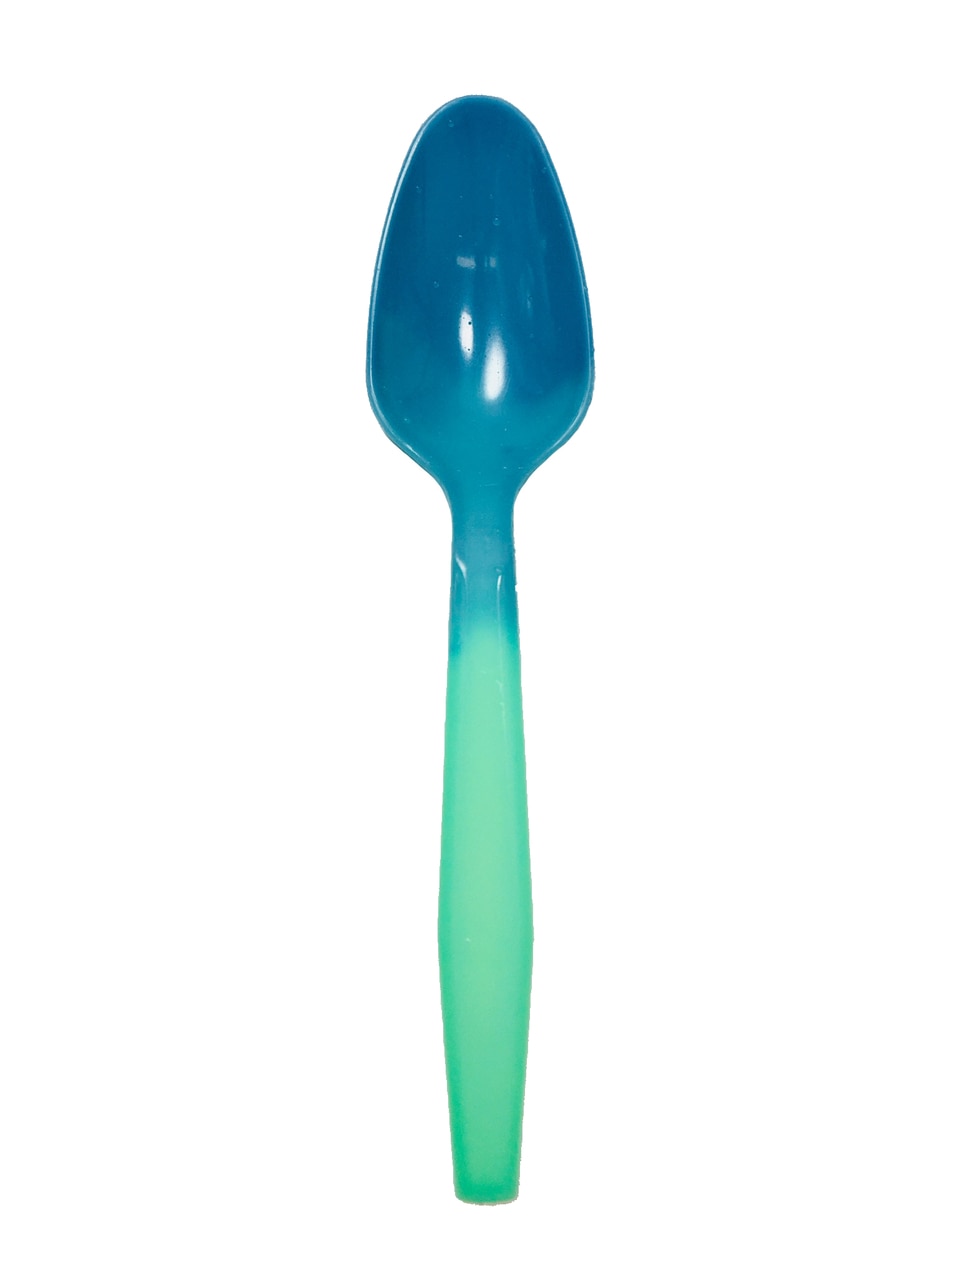 Color Changing Ice Cream Spoons - Green to Blue